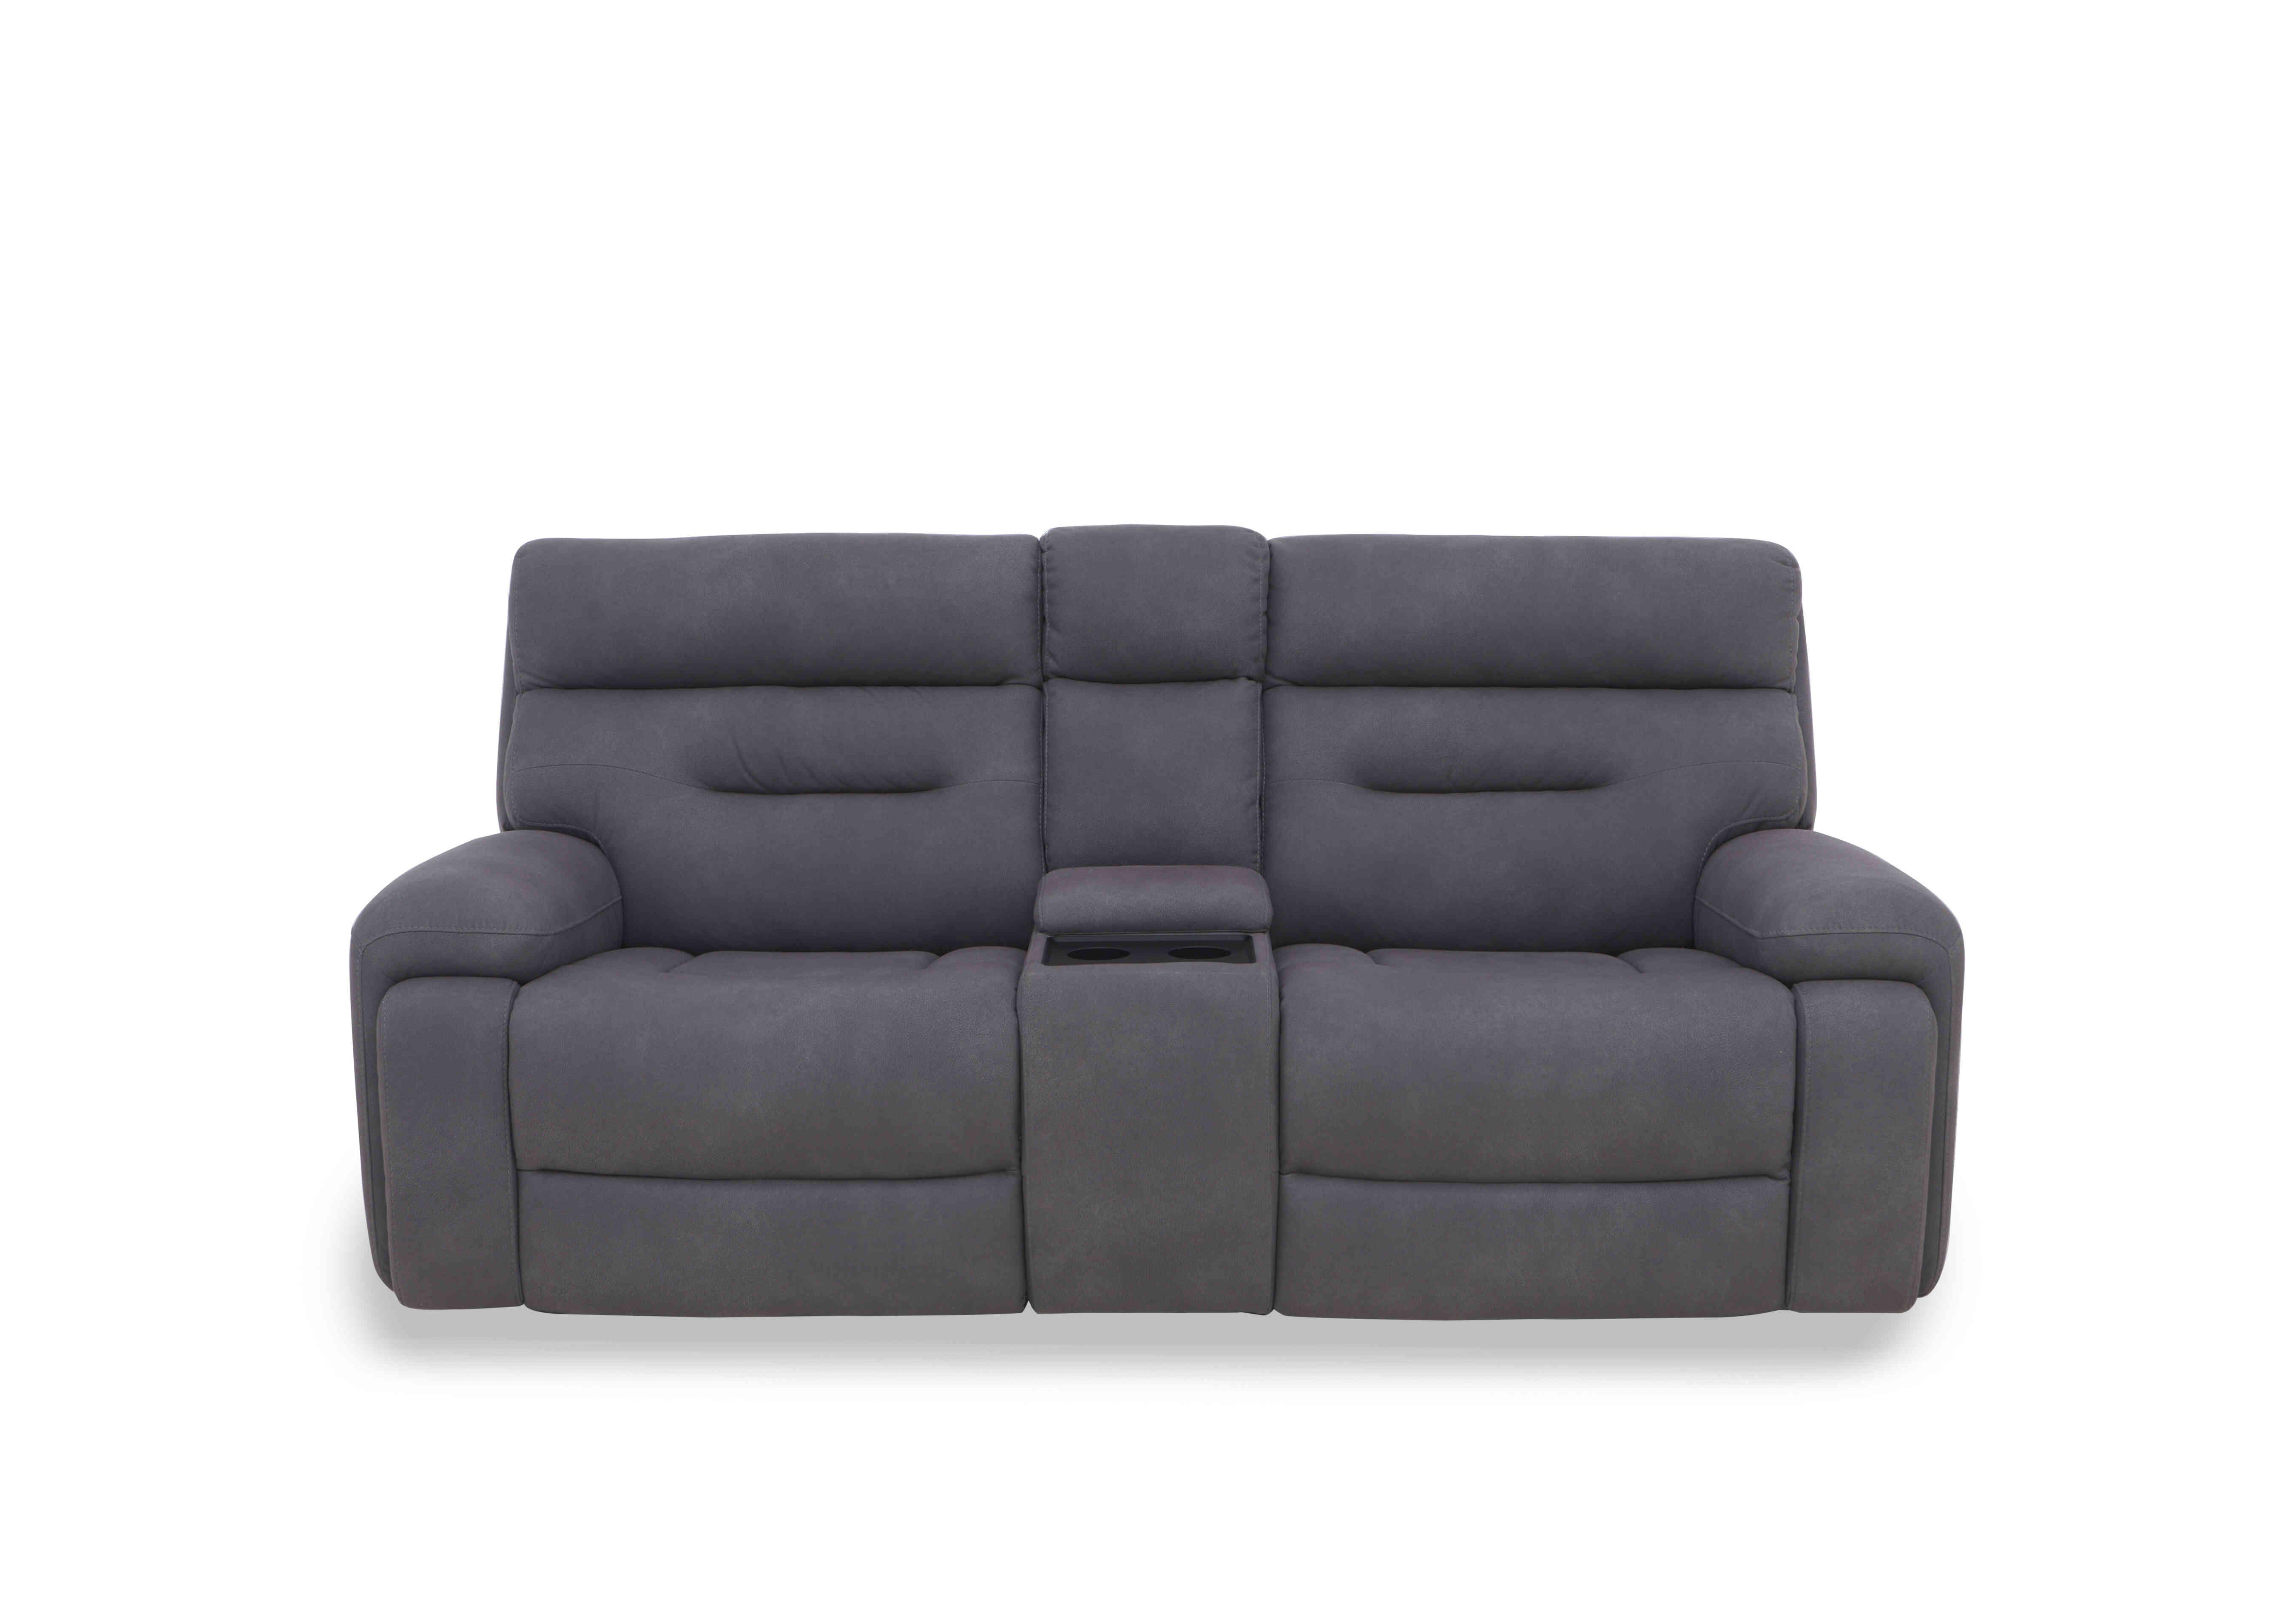 Cinemax Media 3 Seater Fabric Power Recliner Sofa with Power Headrests in Np-1107 Nappa Grey on Furniture Village